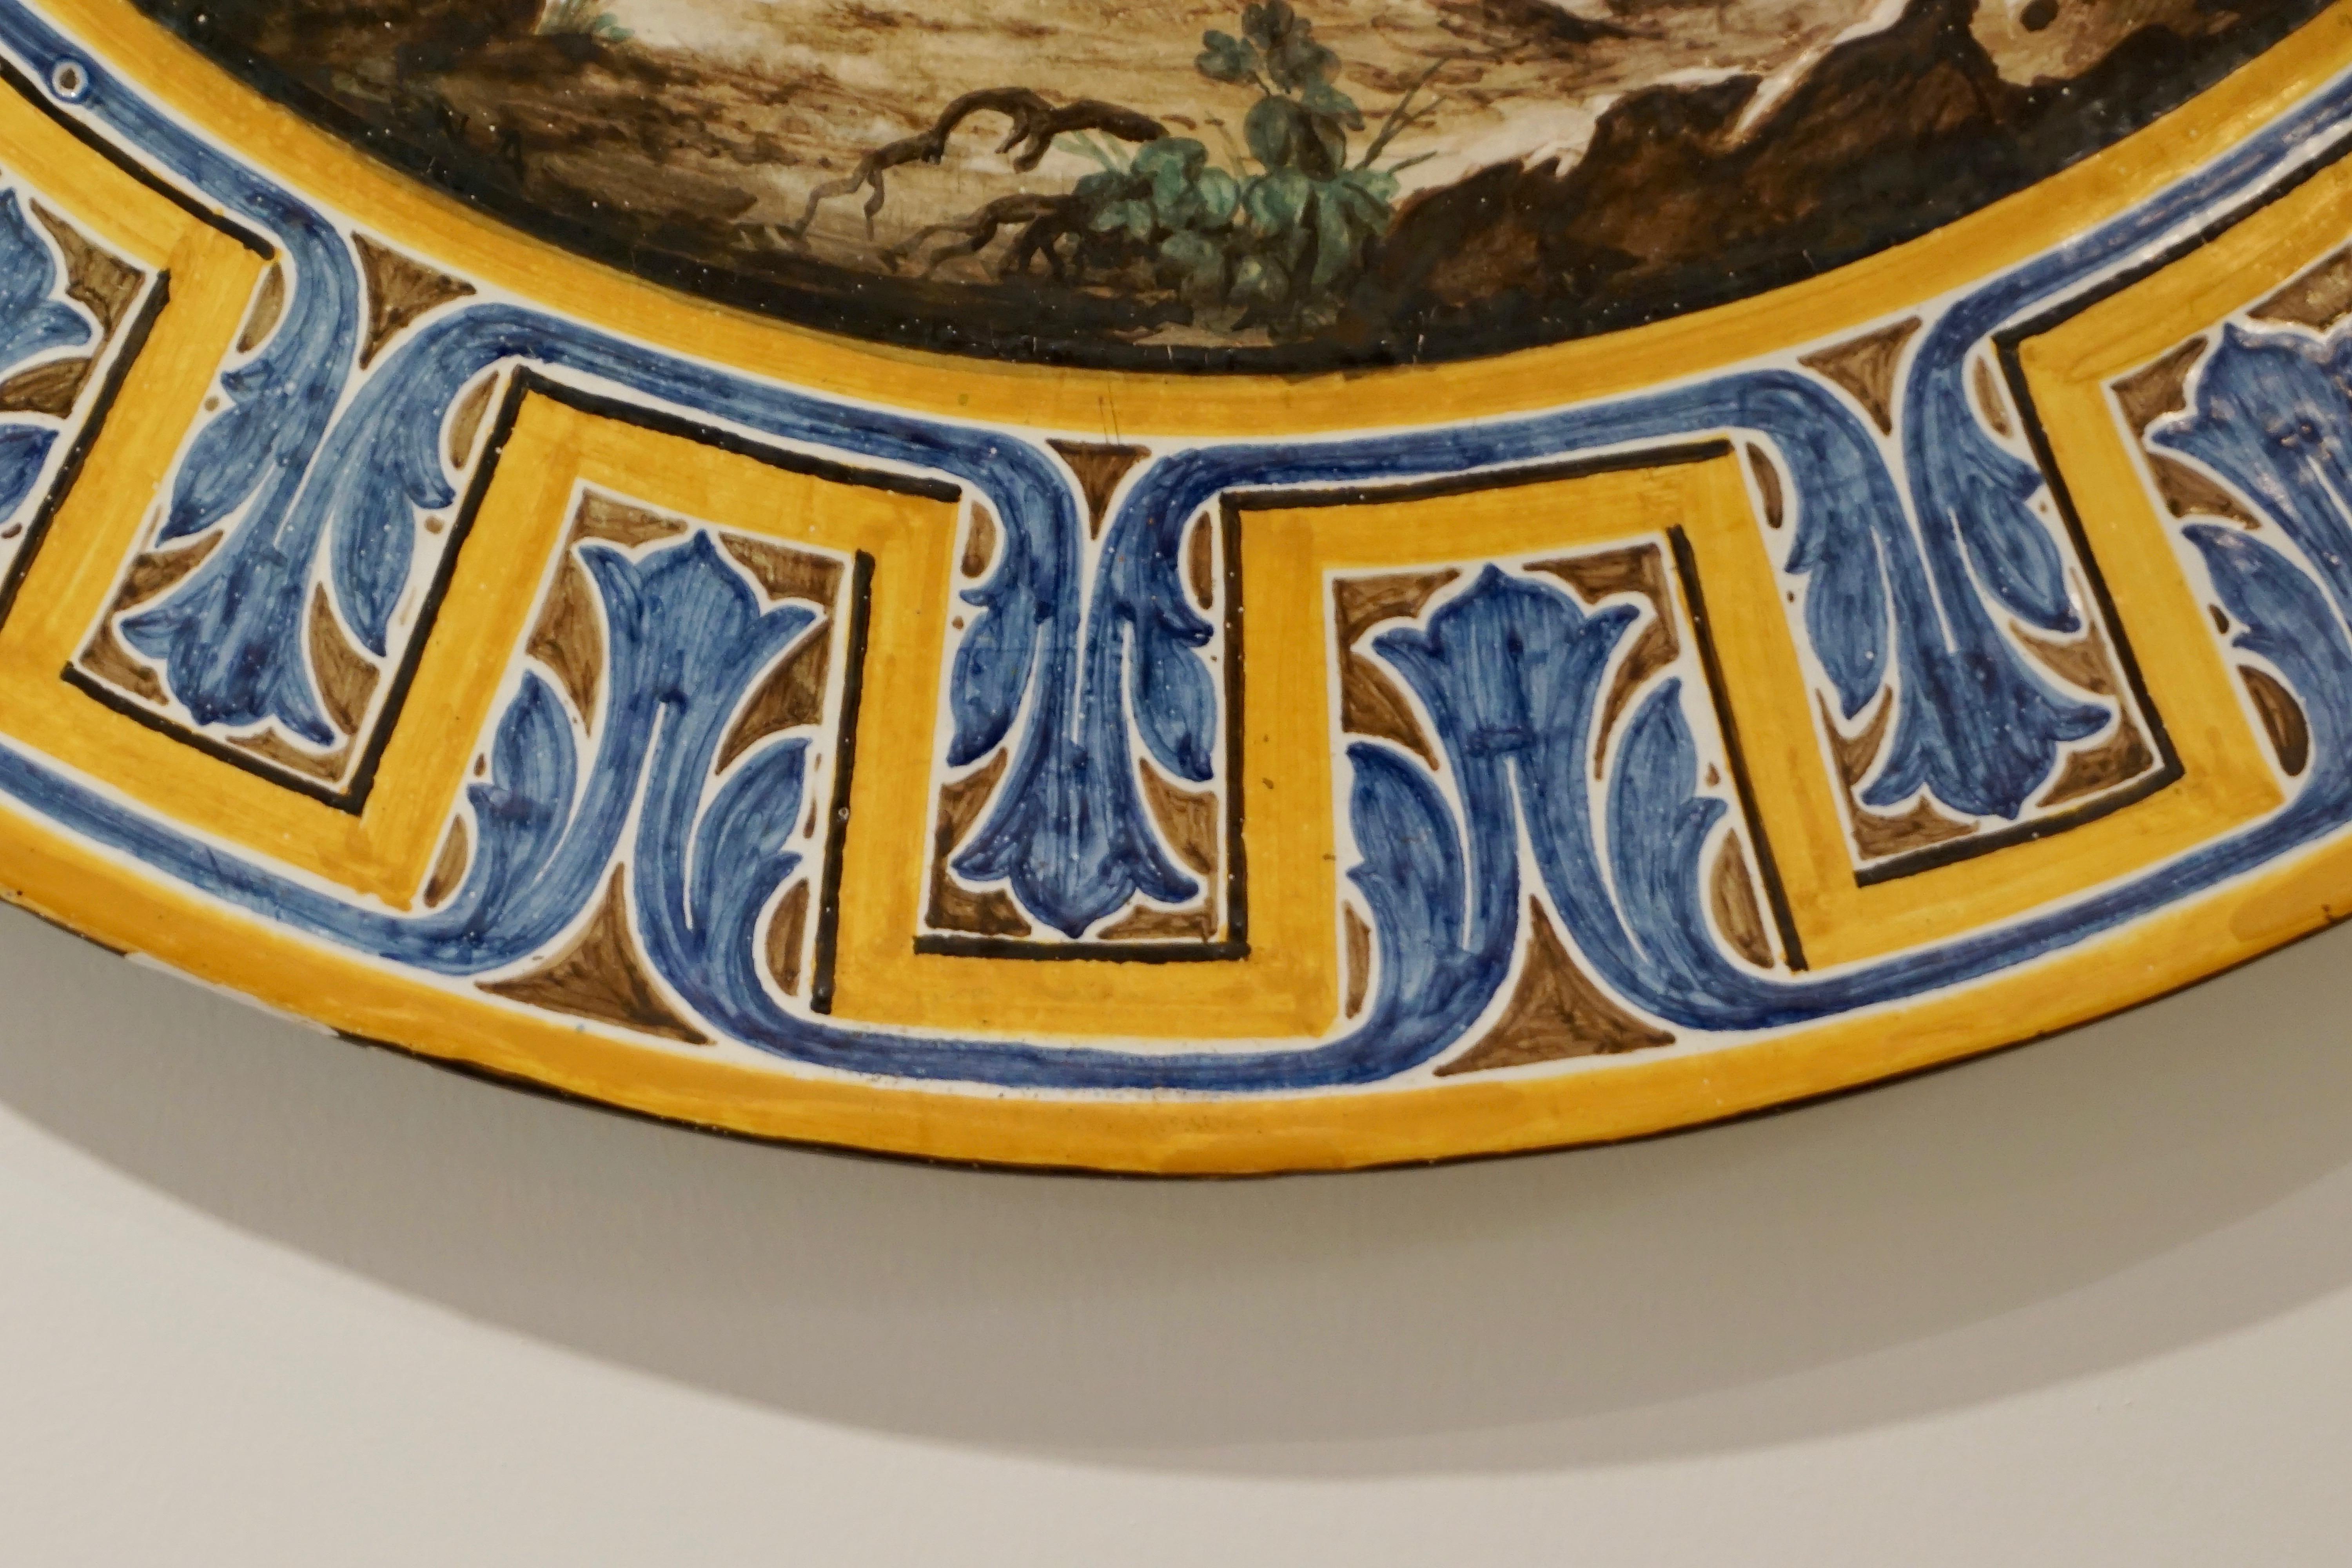 1870s French Rococo Revival Yellow Blue White Enamel Pottery Wall Art Plaque For Sale 6